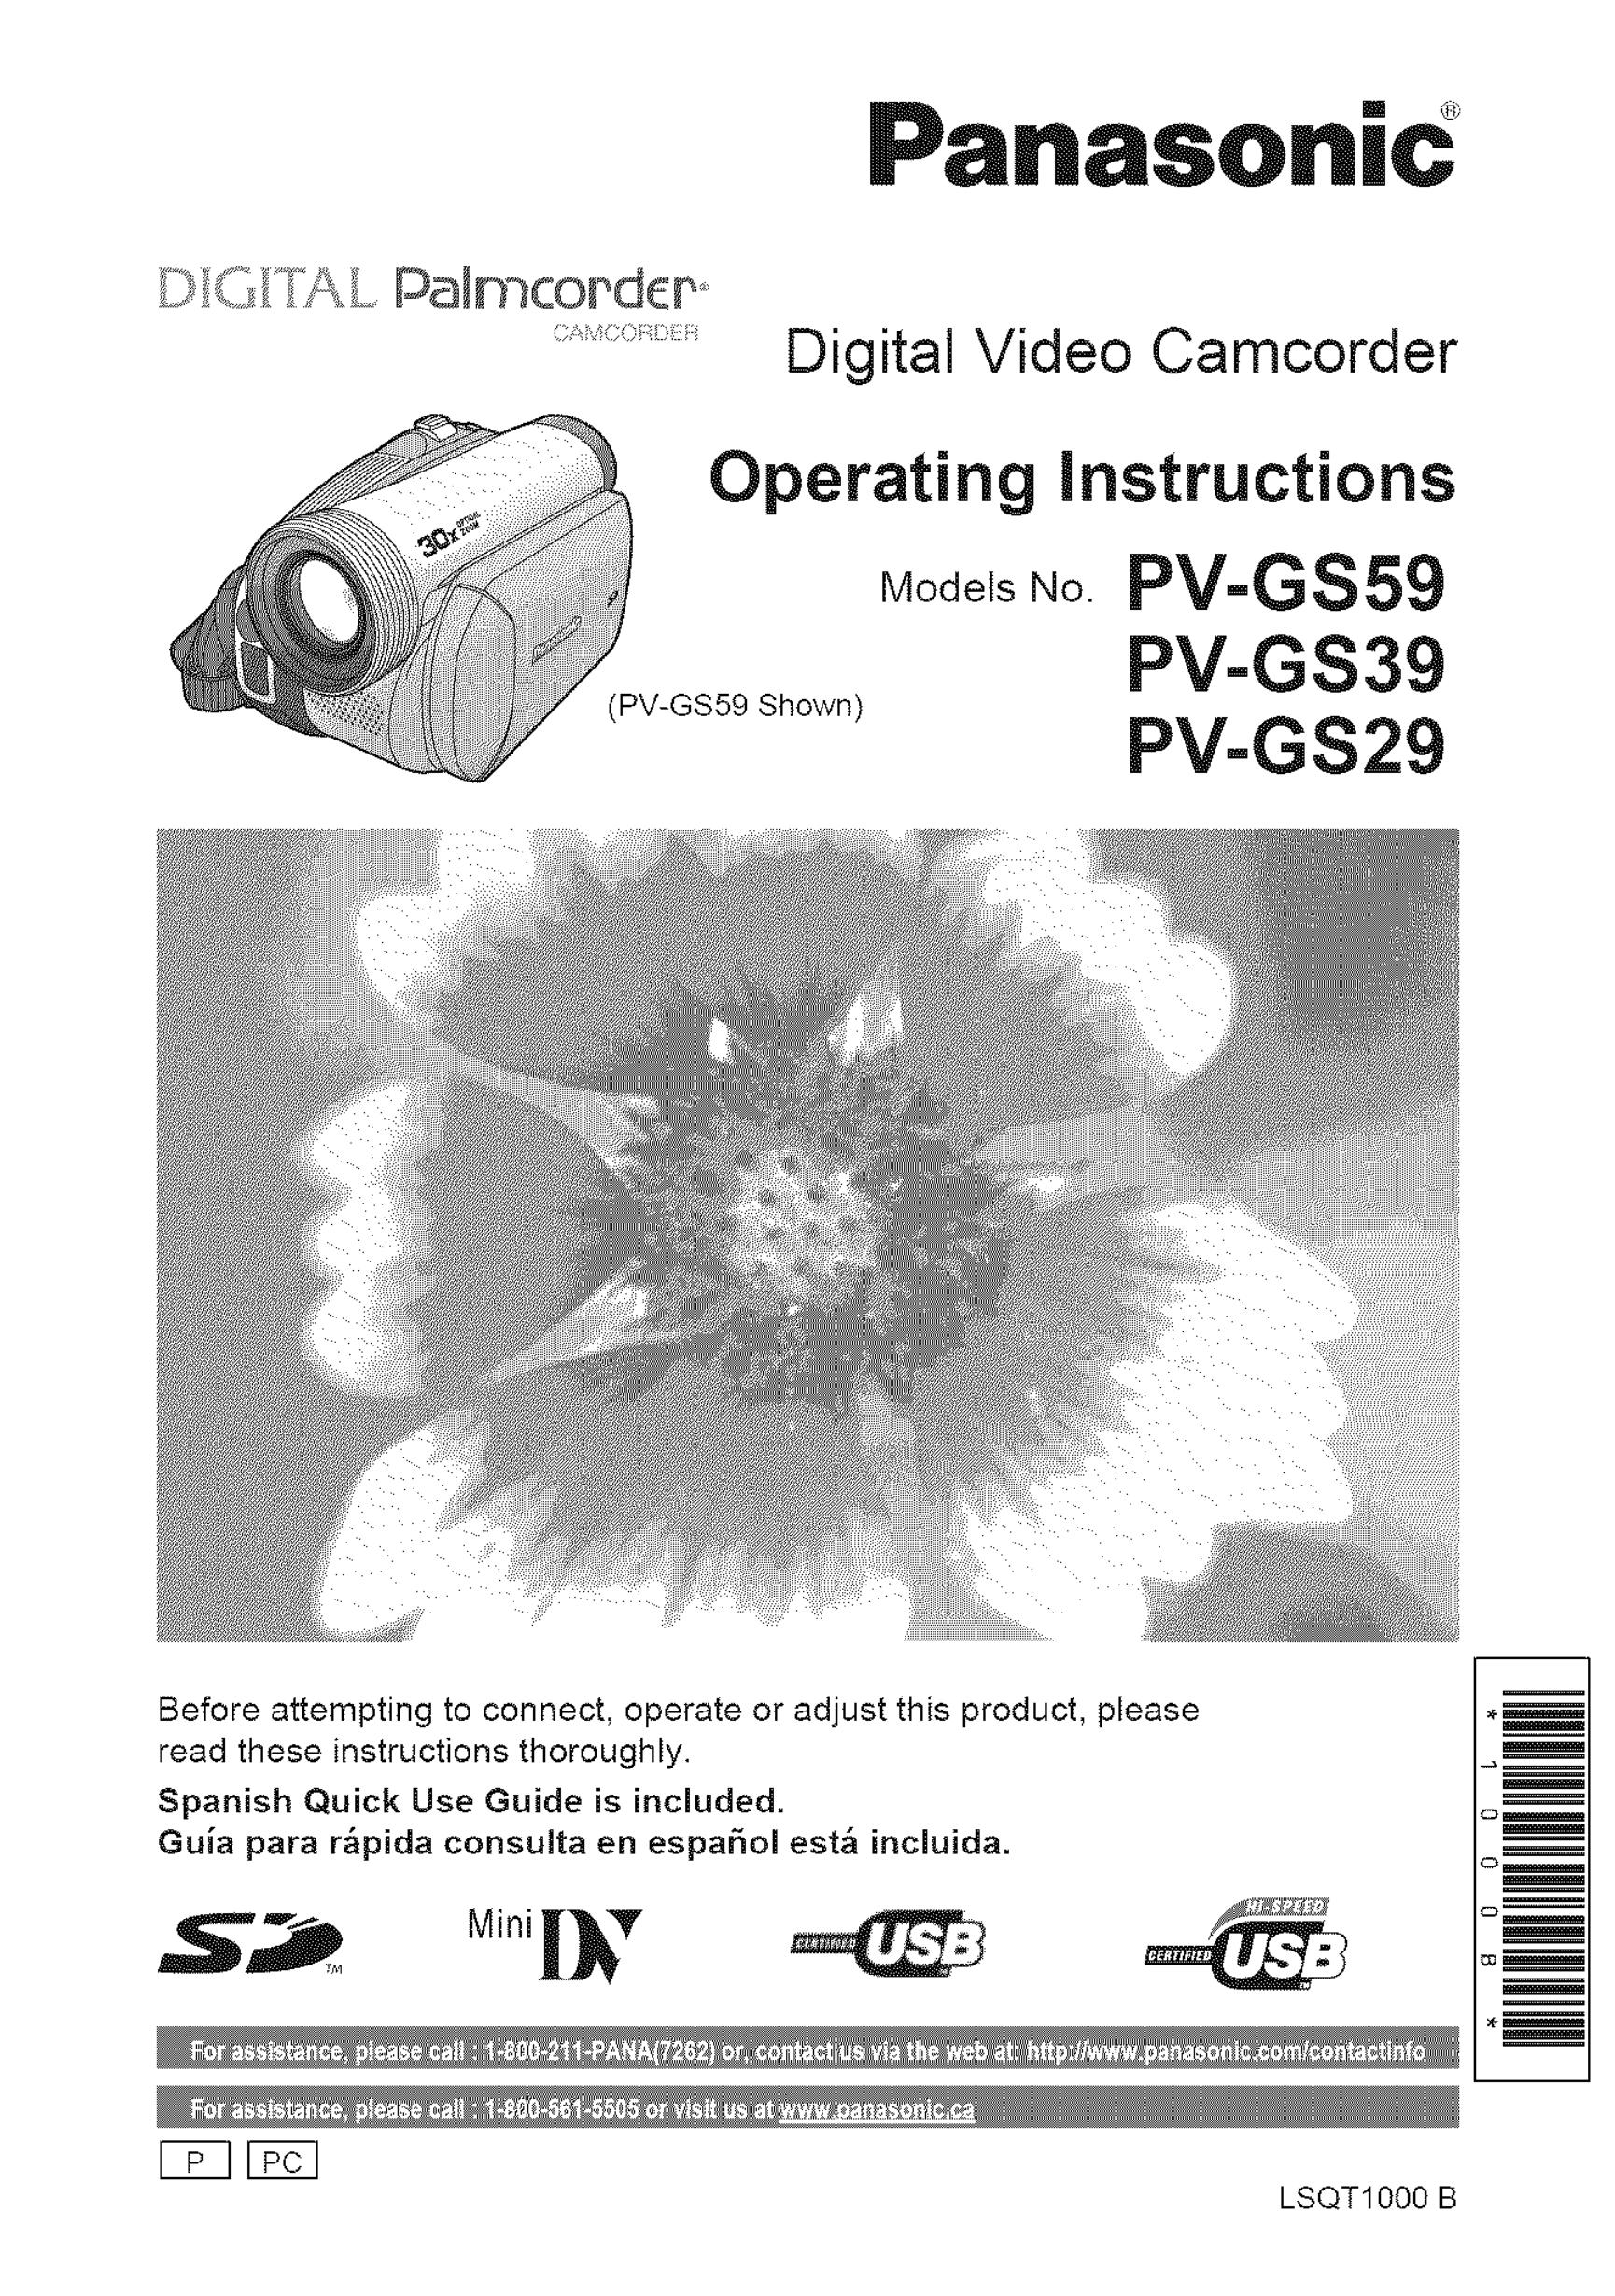 Panasonic PV-GS39 Camcorder Accessories User Manual